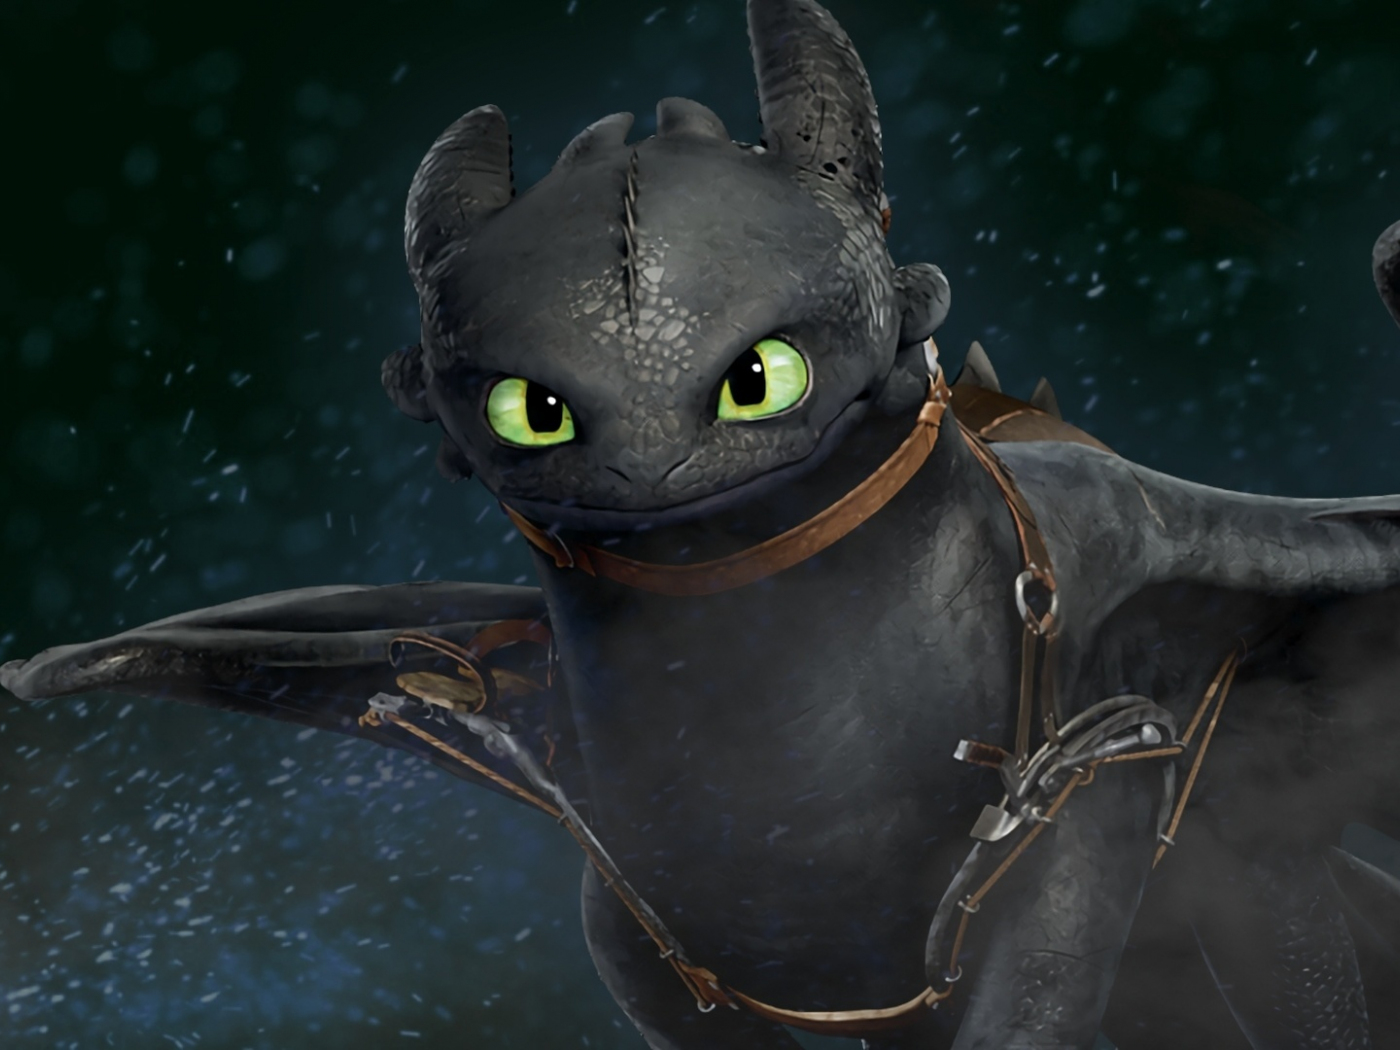 Download 1400x1050 Wallpaper Dragon Toothless How To Train